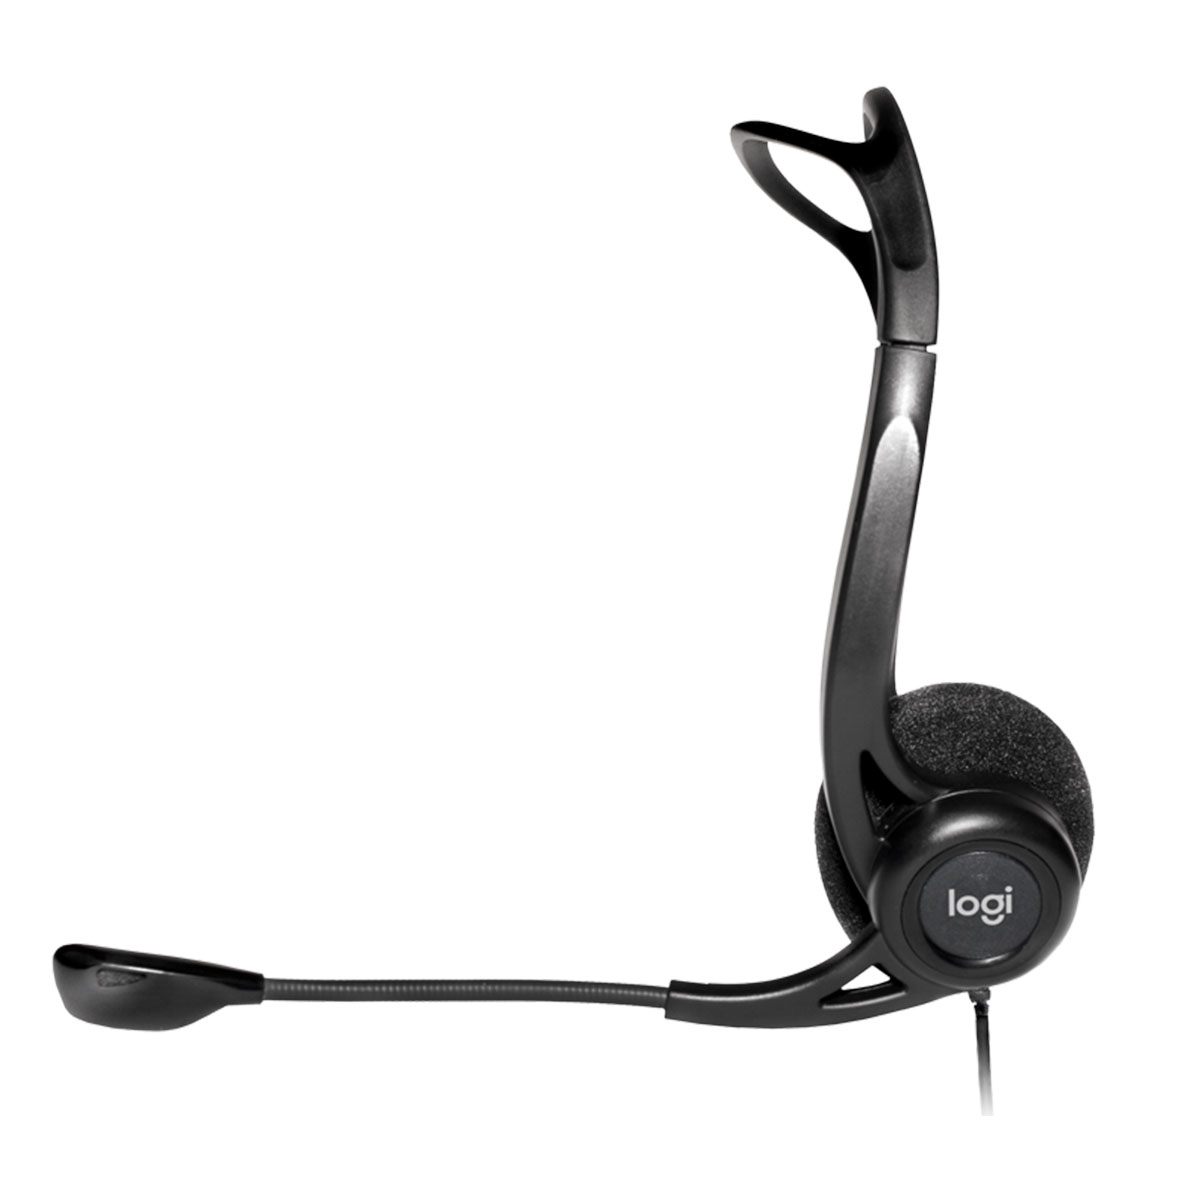 Logitech USB Wired Headset H370 with Digital Quality Sound, Noise Canceling Mic, In-Line Controls, Adjustable Headband